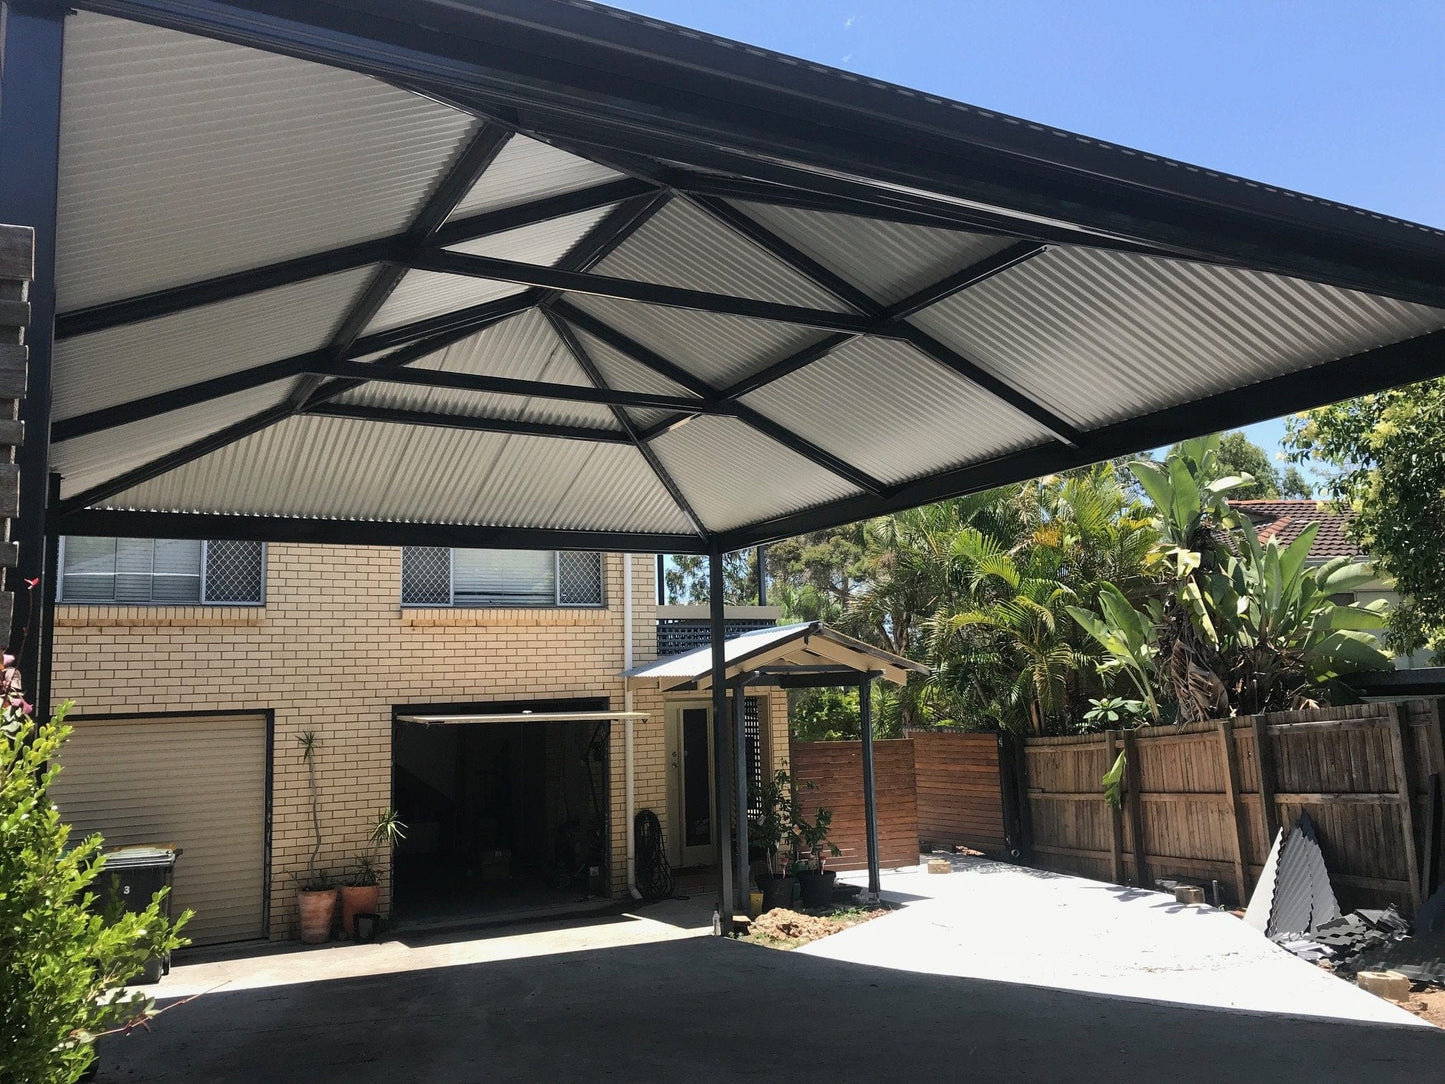 Insulated Gable Patio - 9m x 4m - Supply & Install QHI National